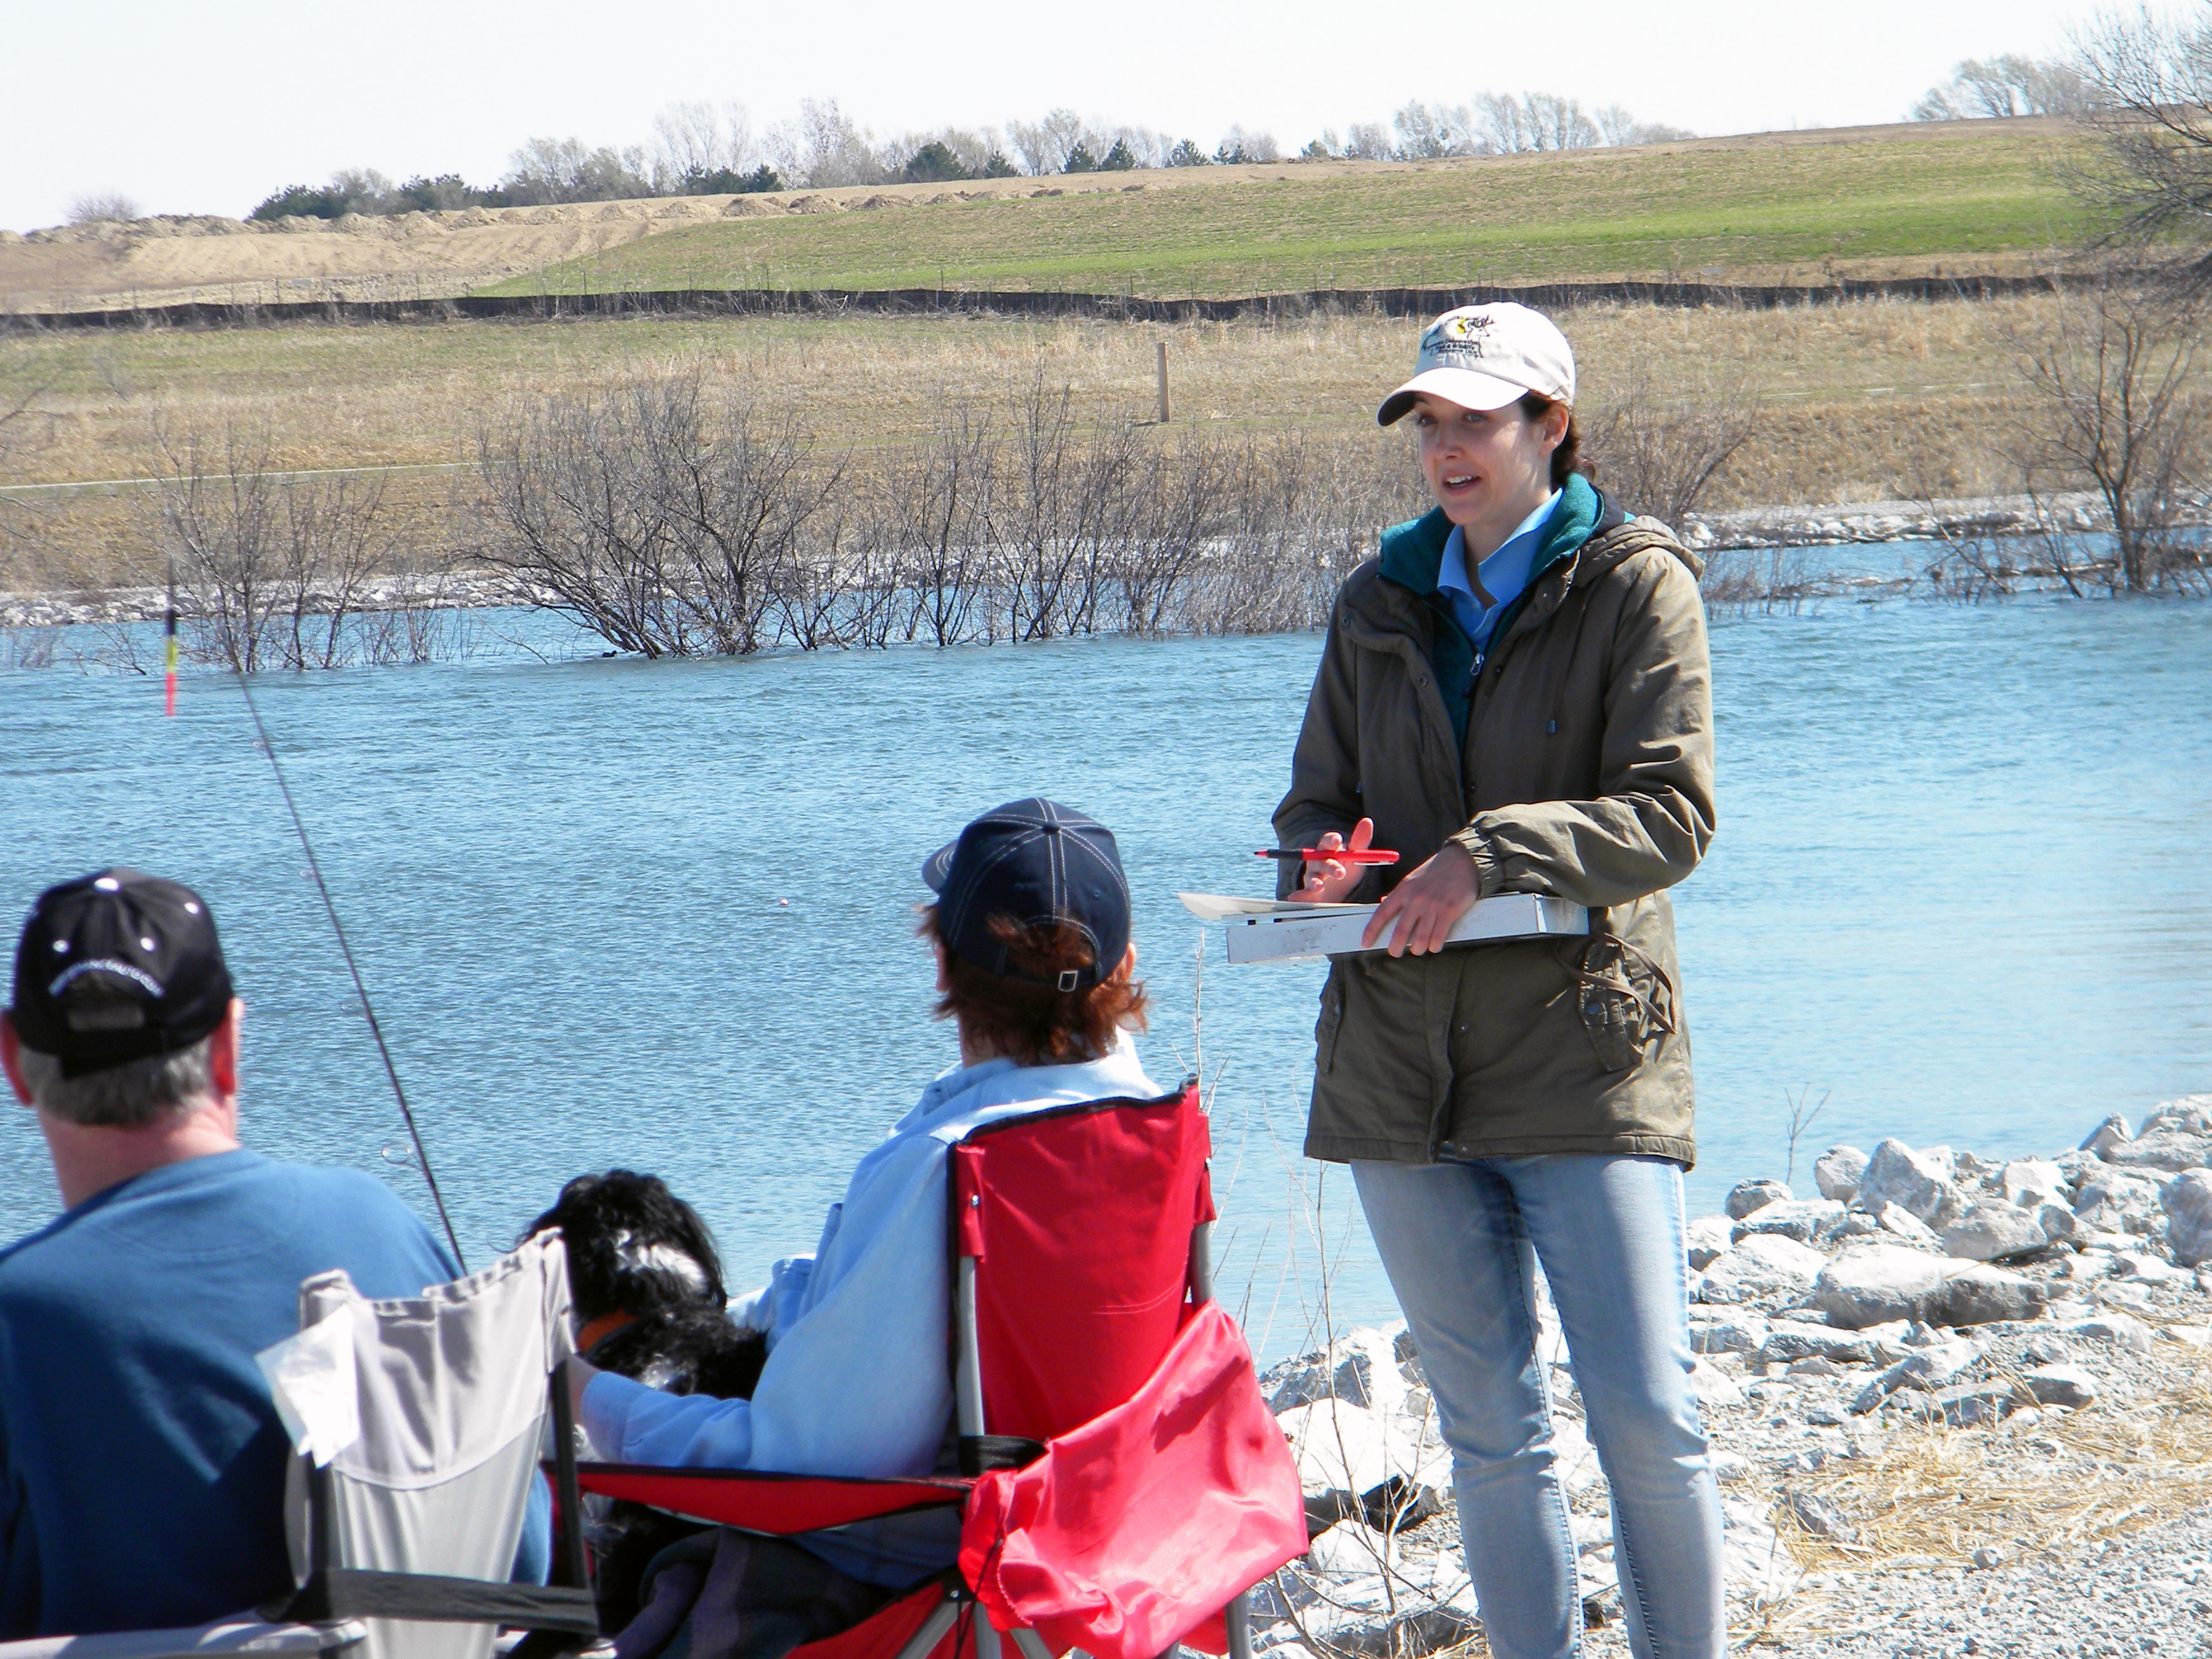 Alexis Fedele interviews anglers in April 2015 at Prairie Queen Lake, in northcentral Sarpy County, Nebraska. / Photo courtesy Nick Cole